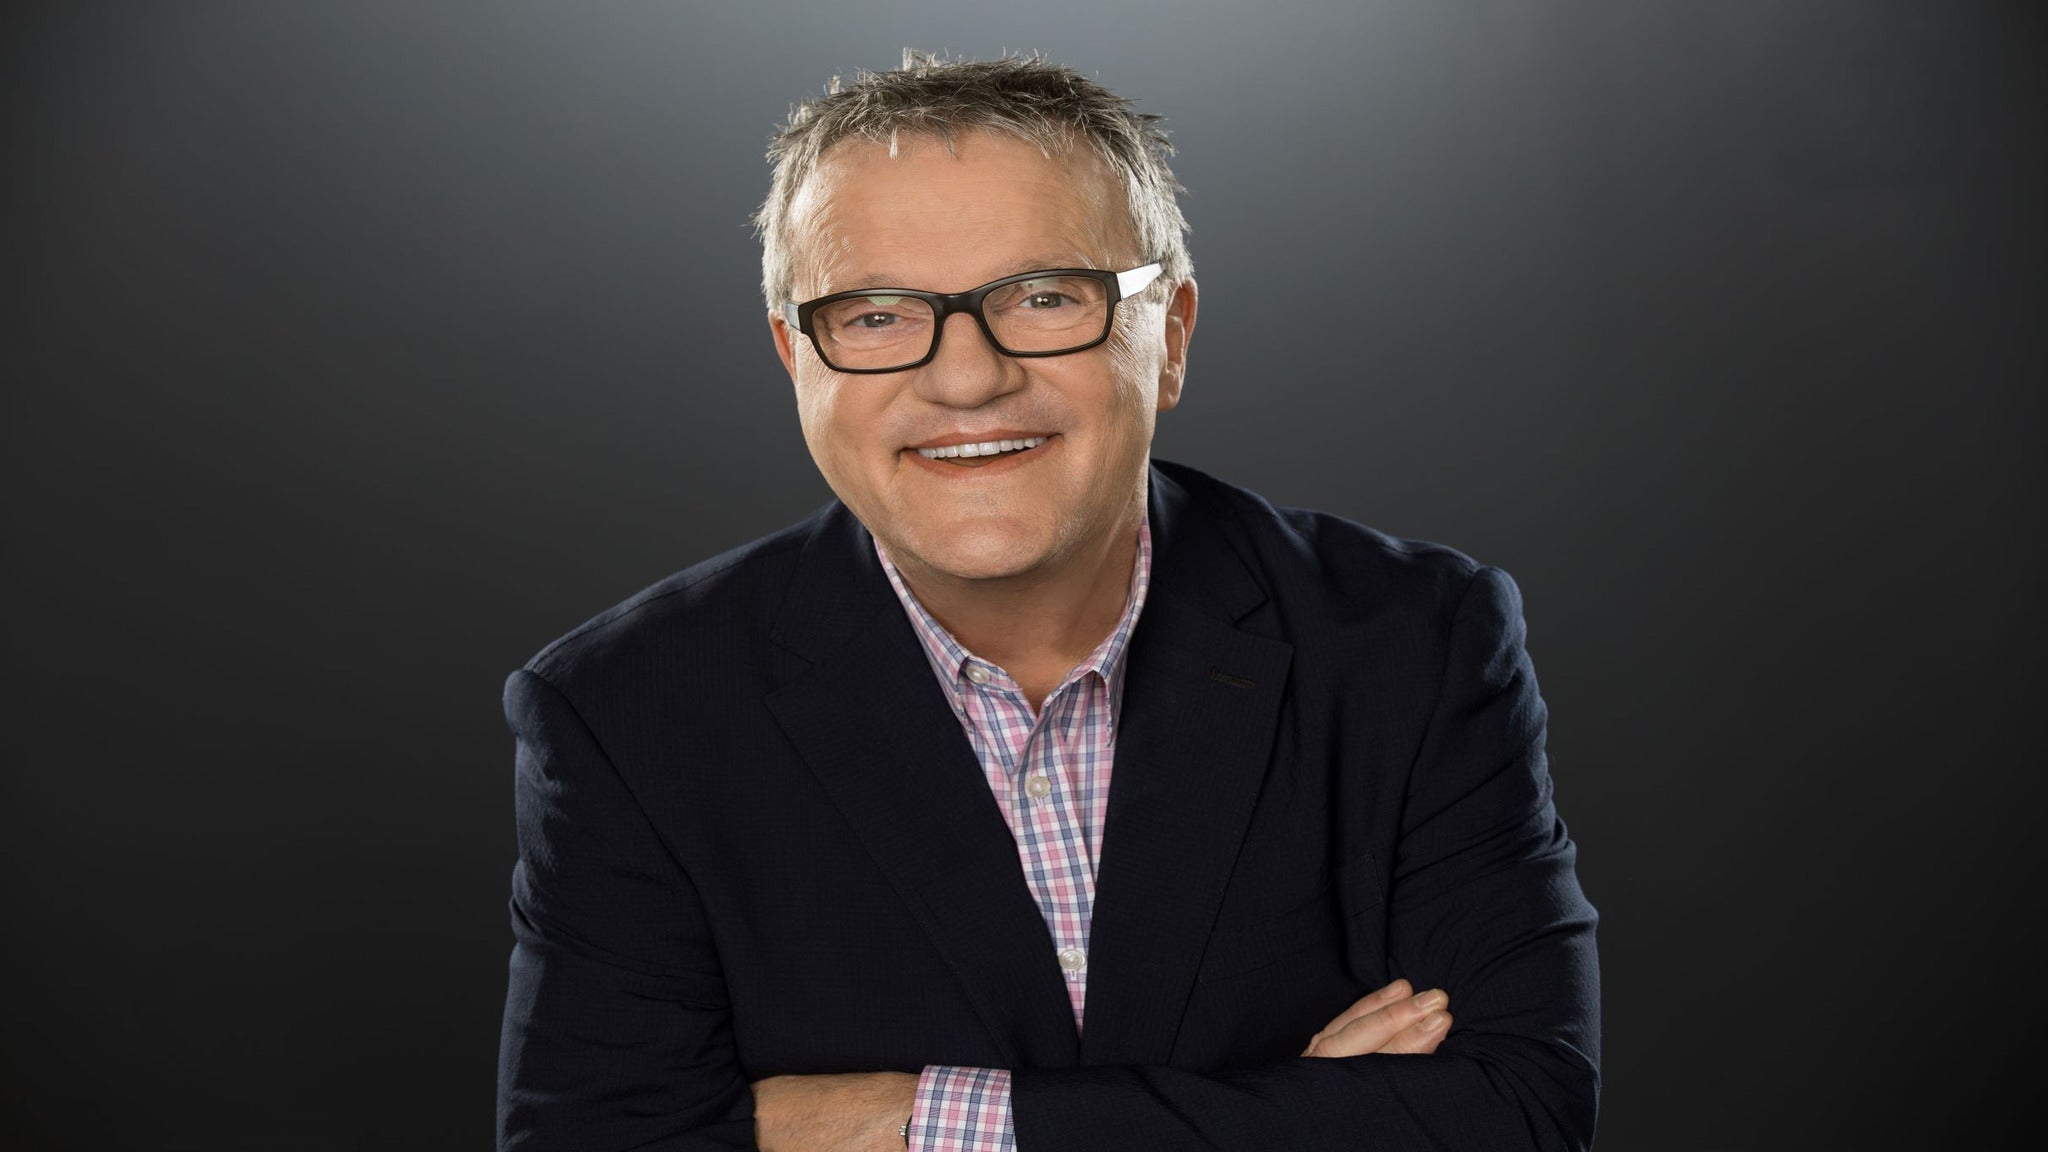 Mark Lowry presale password for early tickets in Anderson